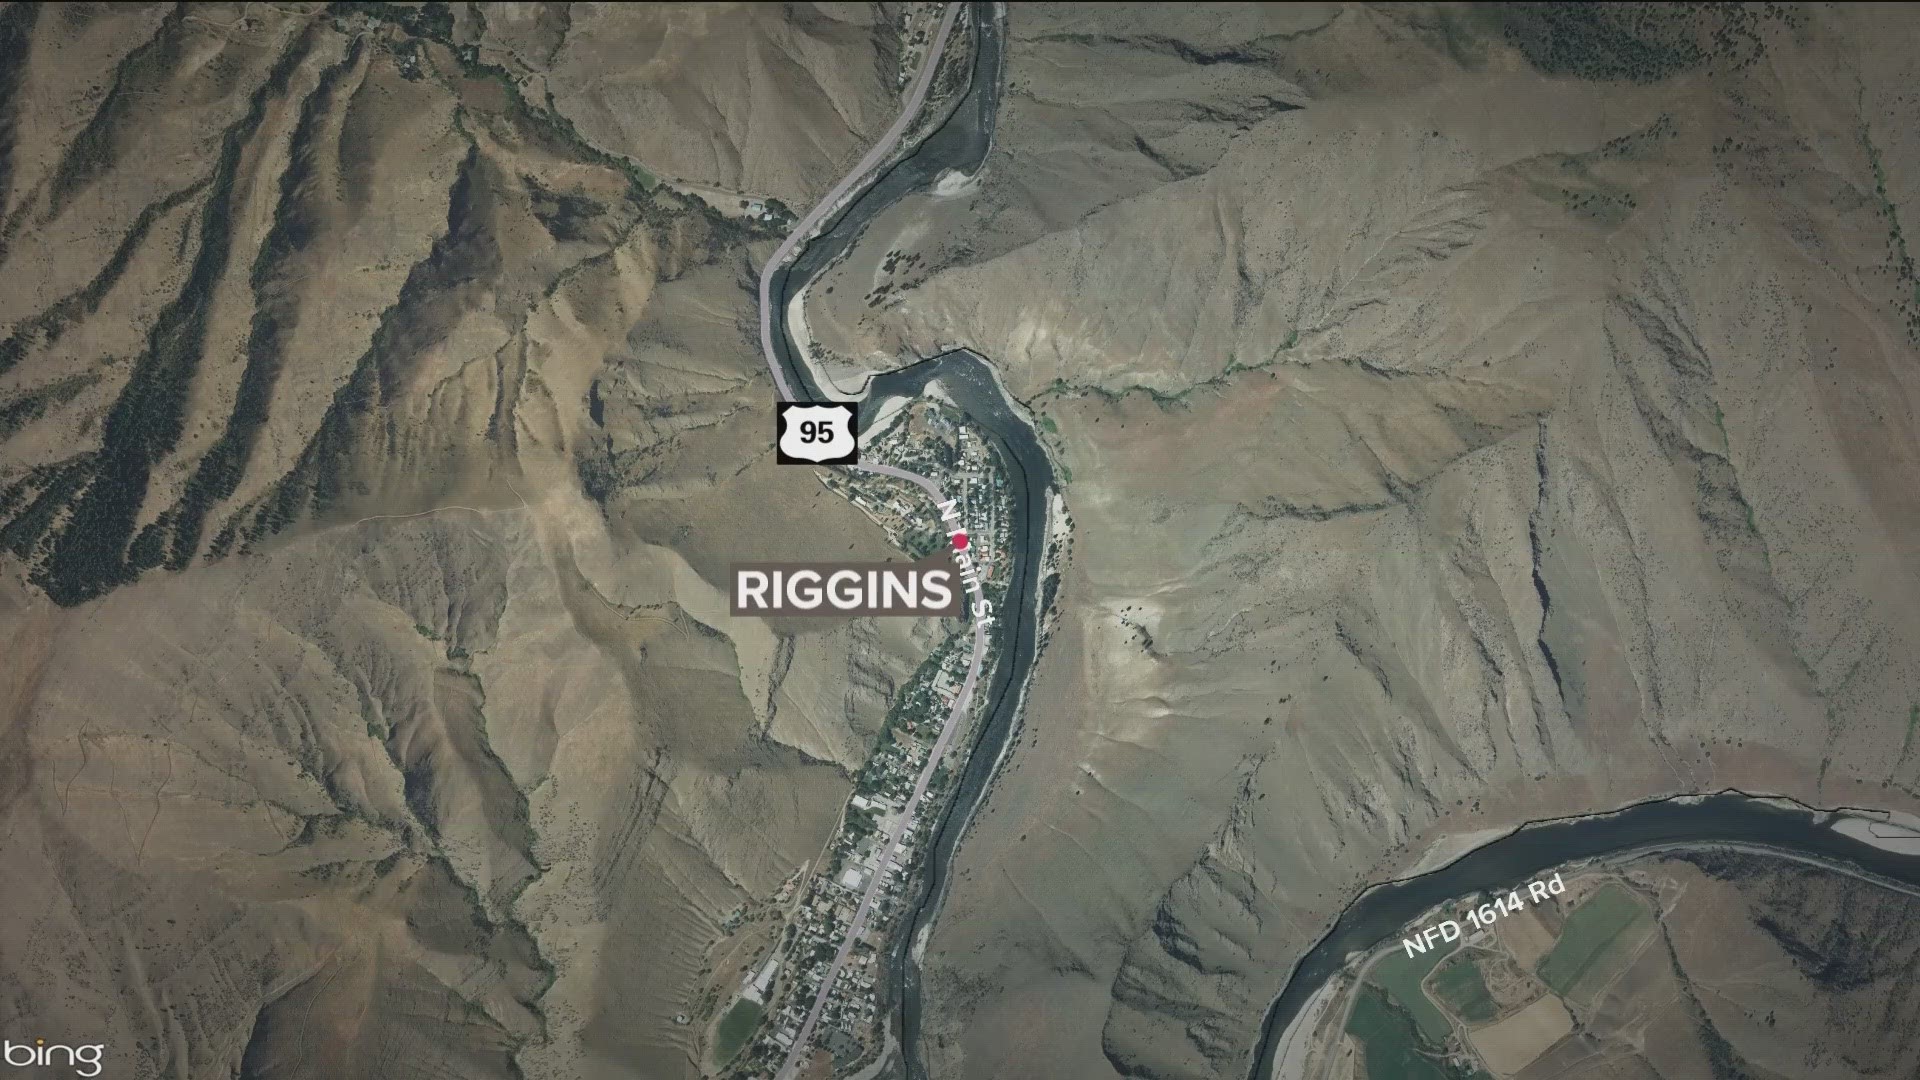 Local authorities responded to a call of an unconscious man being transported to Riggins, where he later died.